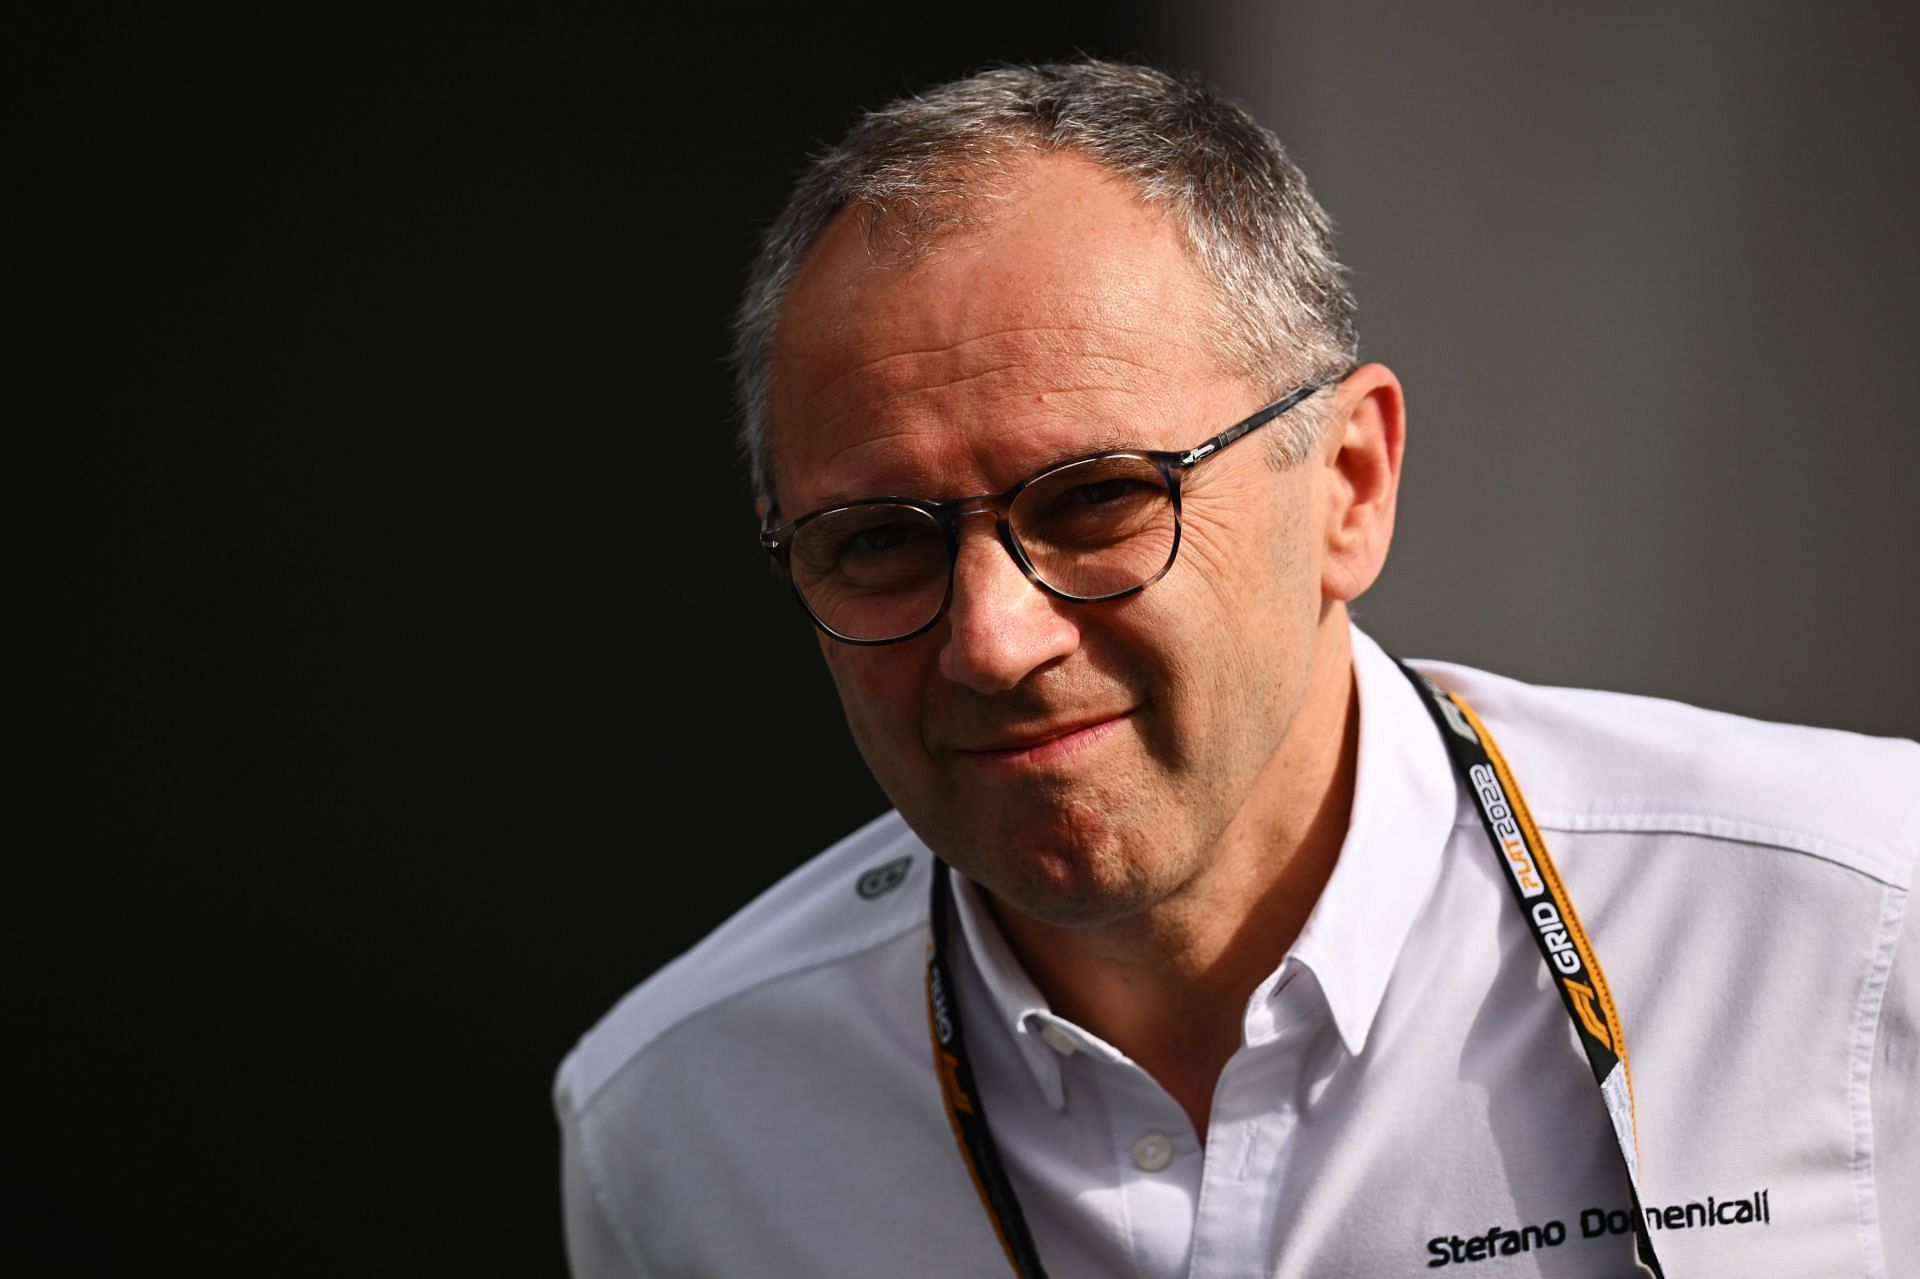 Stefano Domenicali has dismissed rumors suggesting that some European venues might lose their place on the calendar